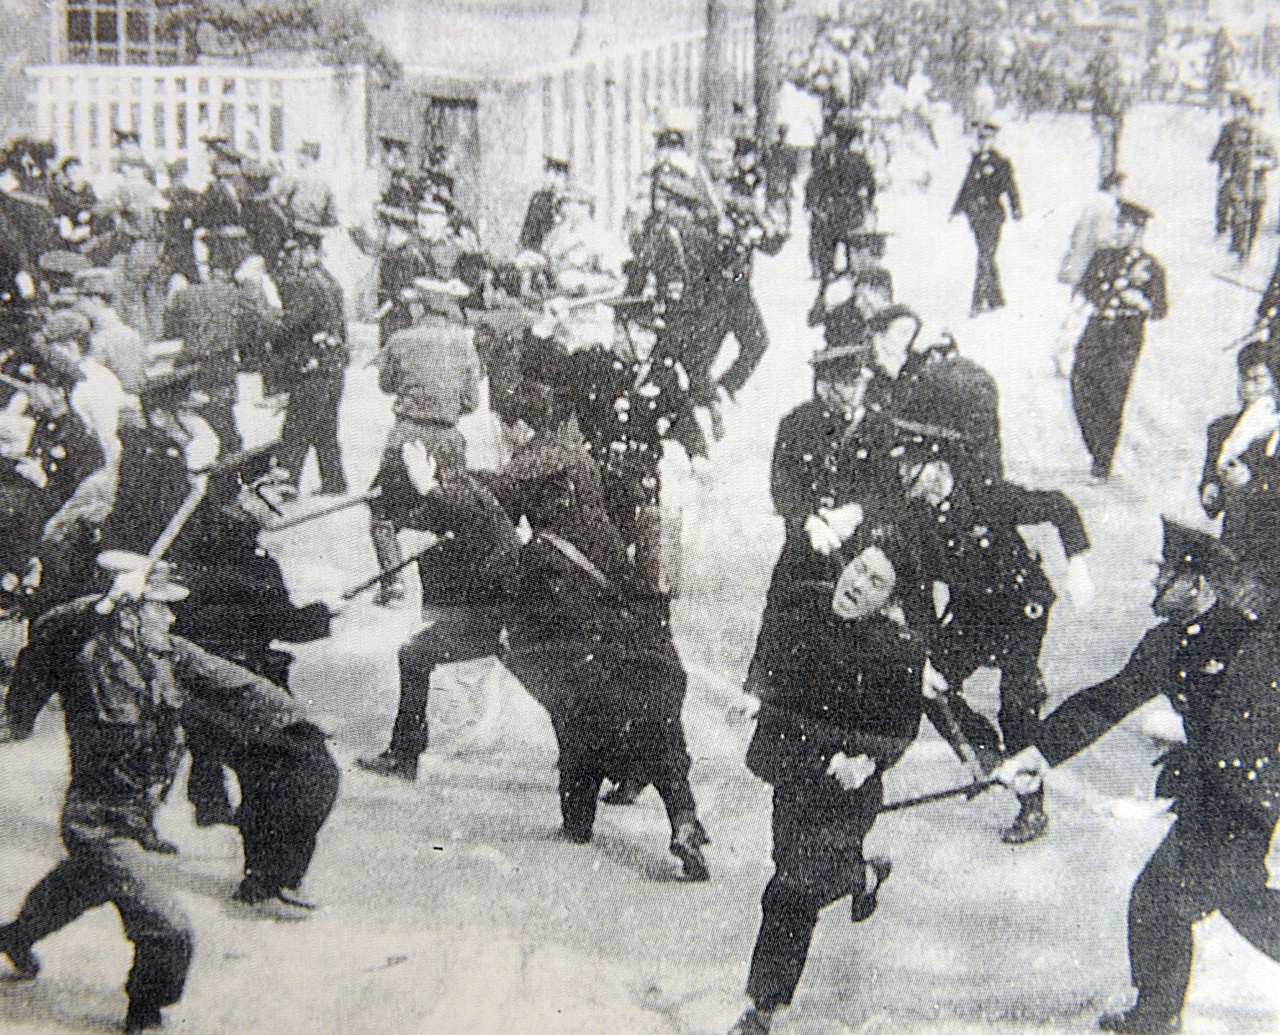 This undated photo shows the anti-government protestors and police during the April 19 Revolution in 1960. / The Korea Herald